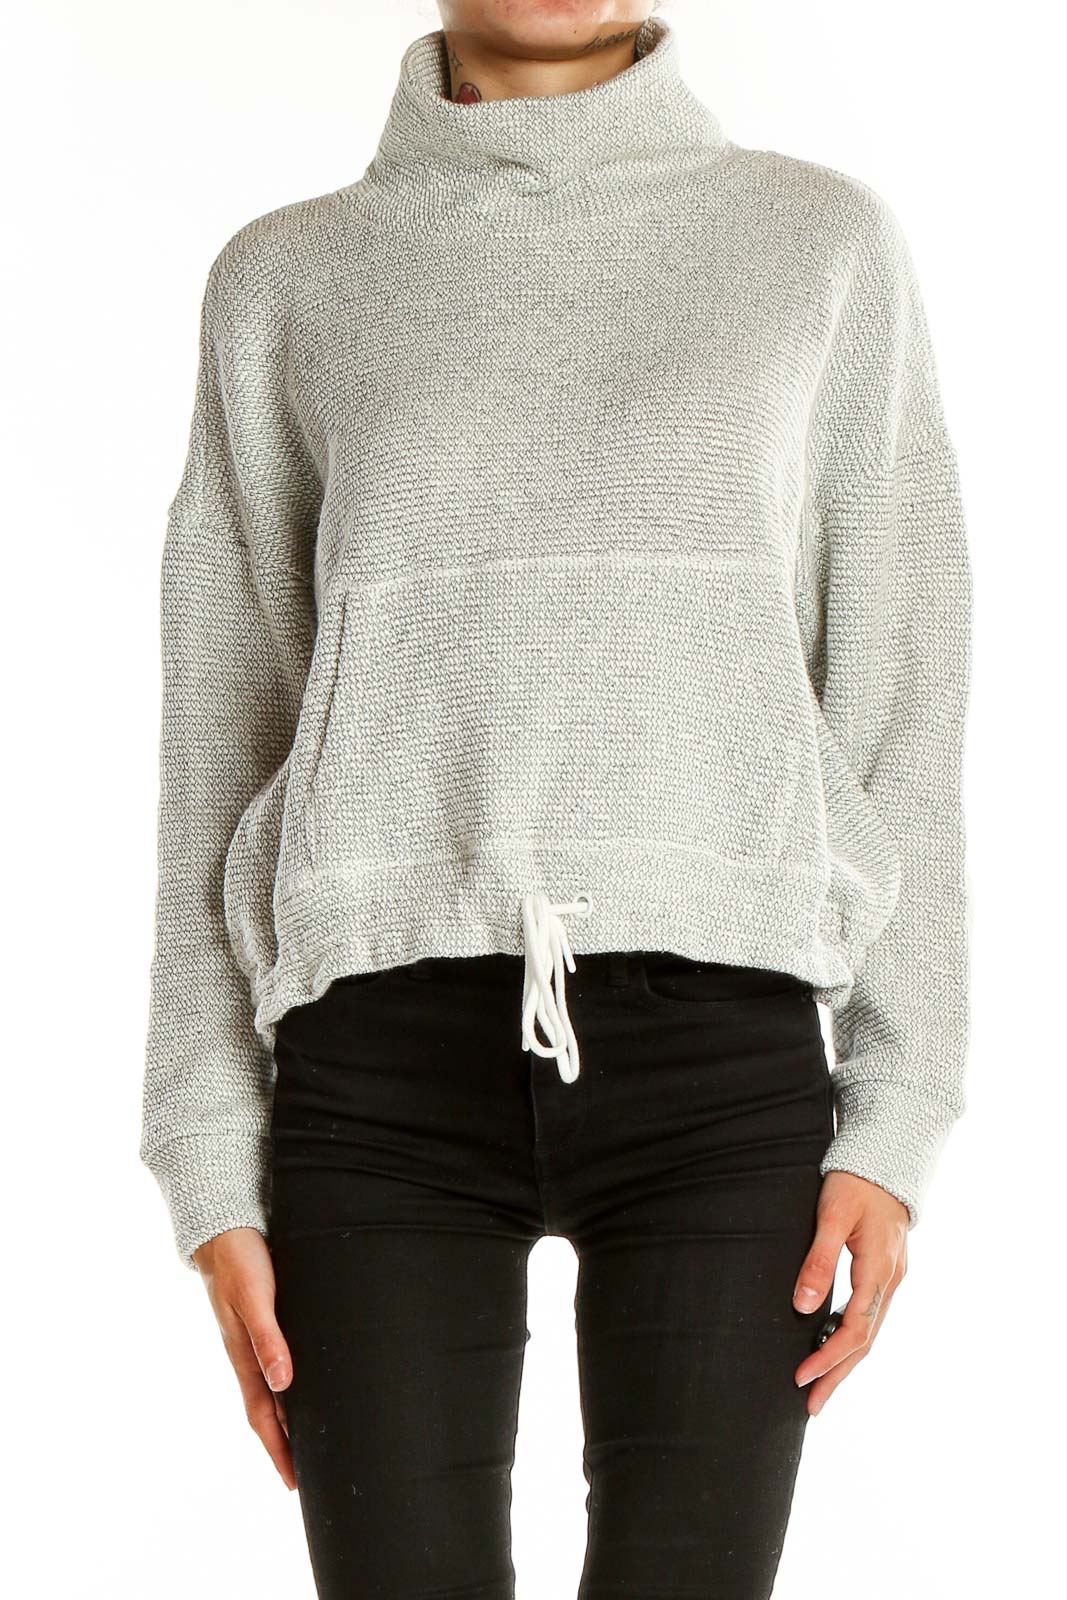 Gray Textured High-Neck Sweater Front